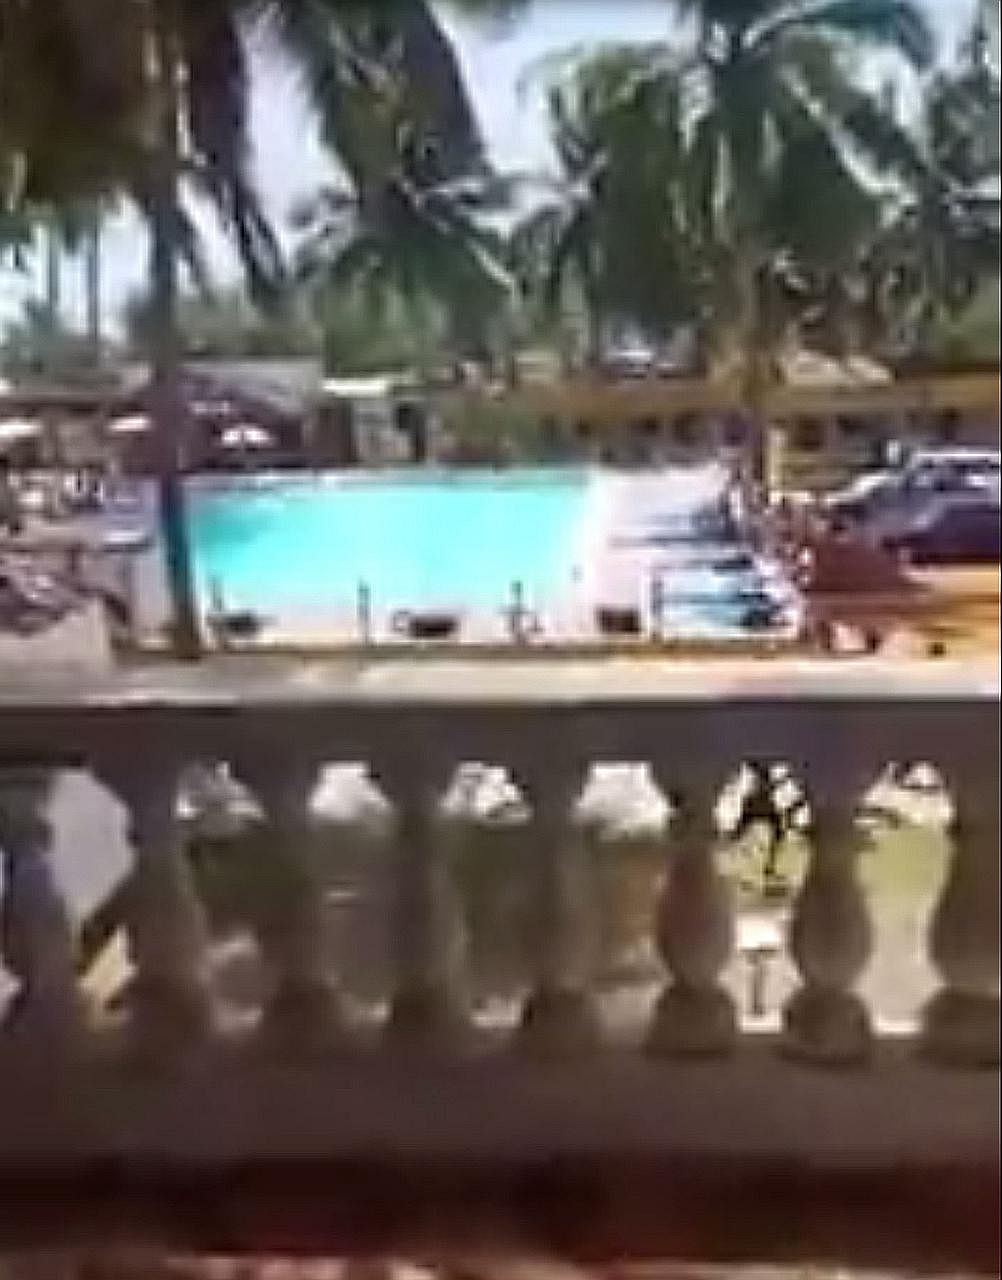 People fleeing (at bottom right) the shooting at the beach resort of Grand-Bassam yesterday. The beach was evacuated by the national police and French armed forces amid the hostage crisis.